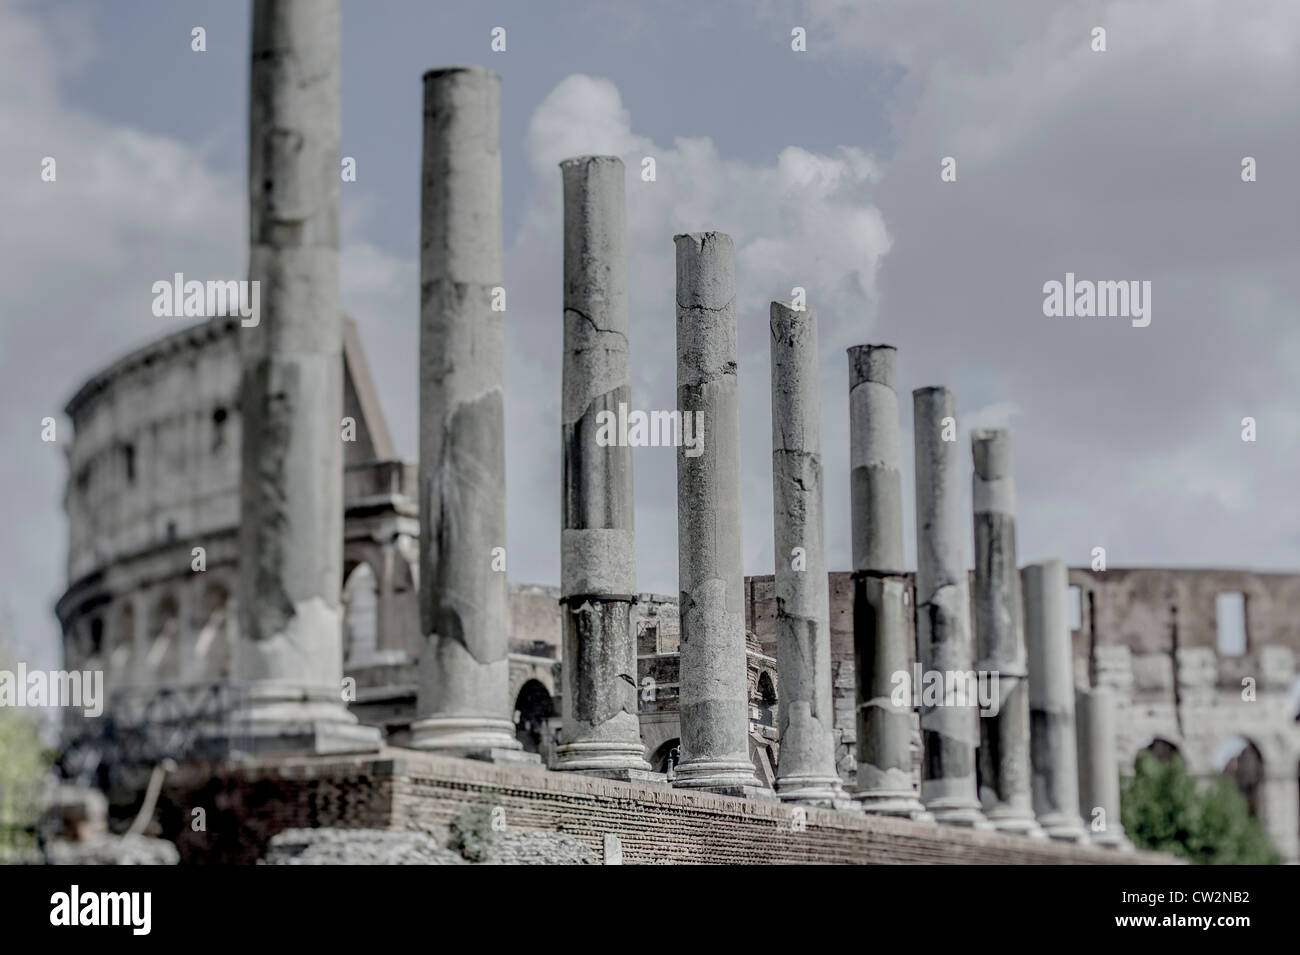 A row of stone columns outside the Colosseum, Rome, Italy Stock Photo